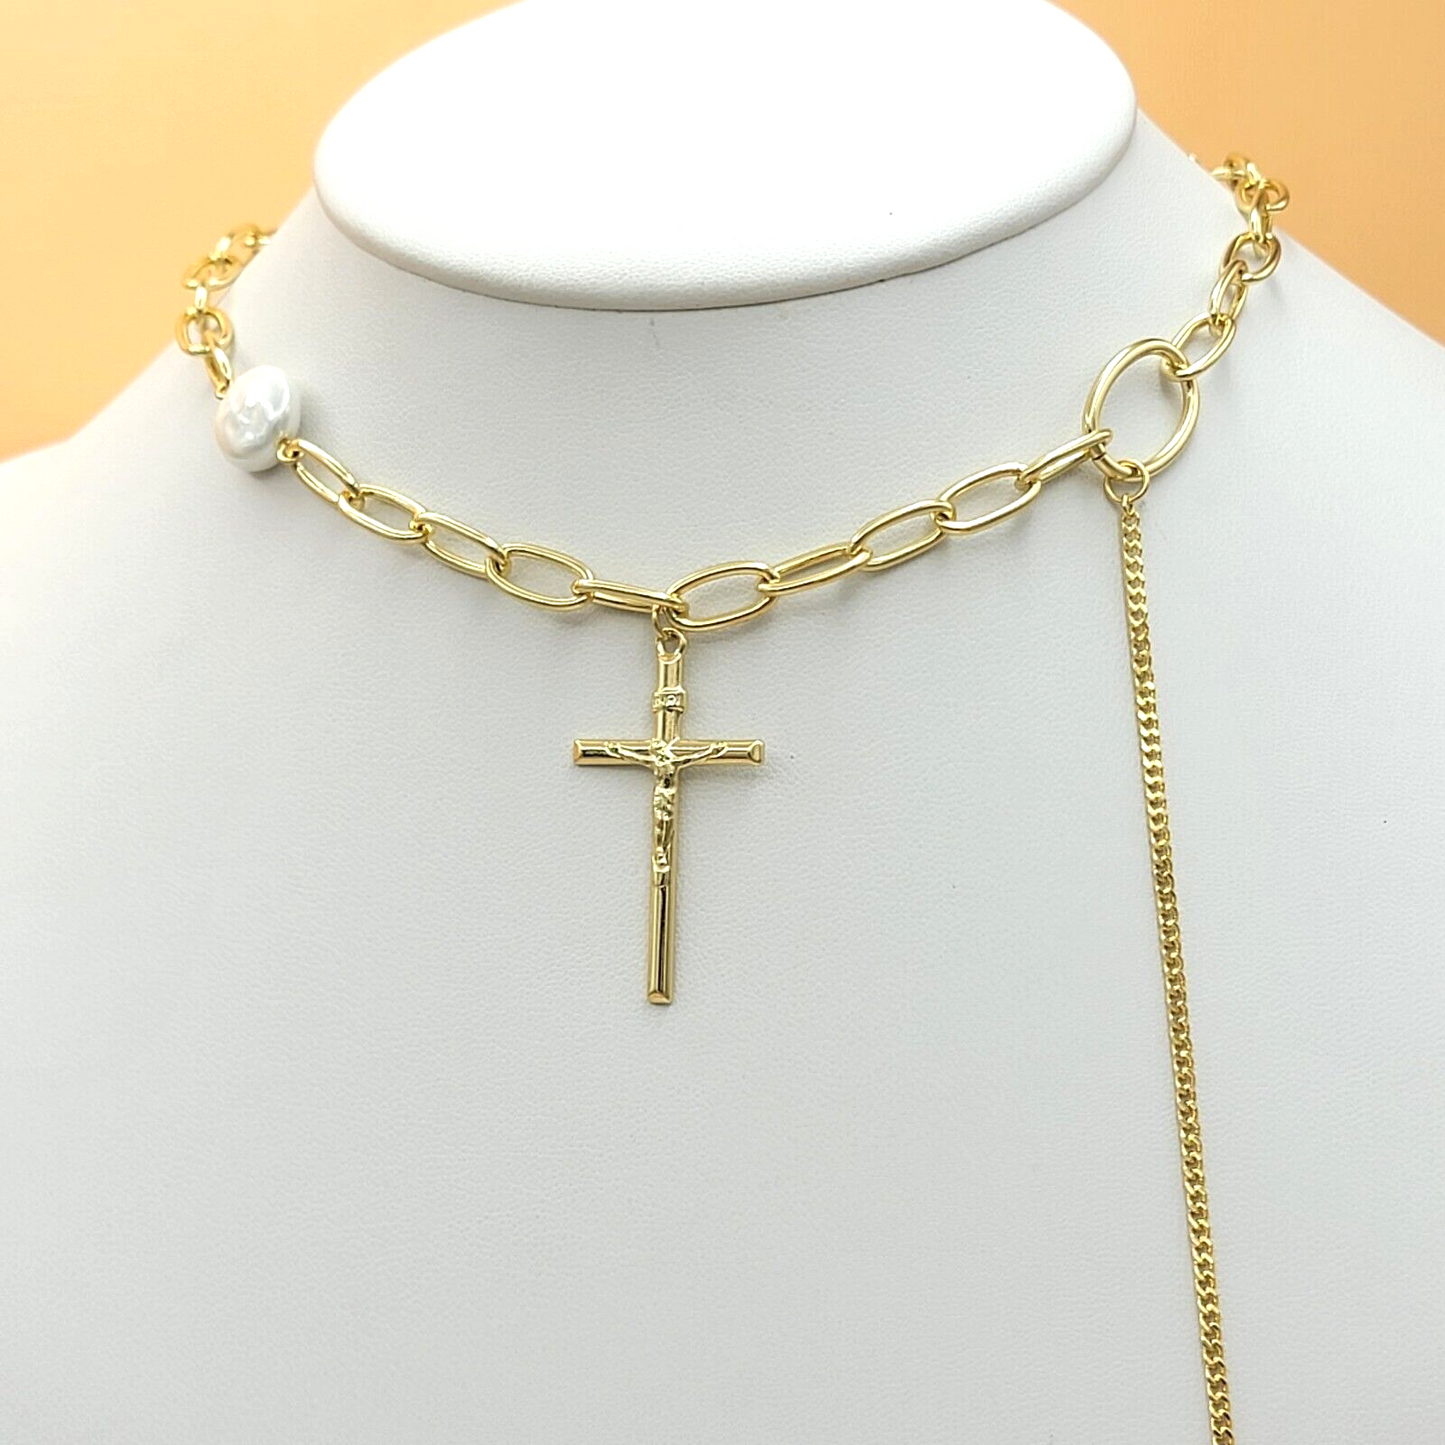 Necklaces - 14K Gold Plated. Cross Pendant & stylish Chain.